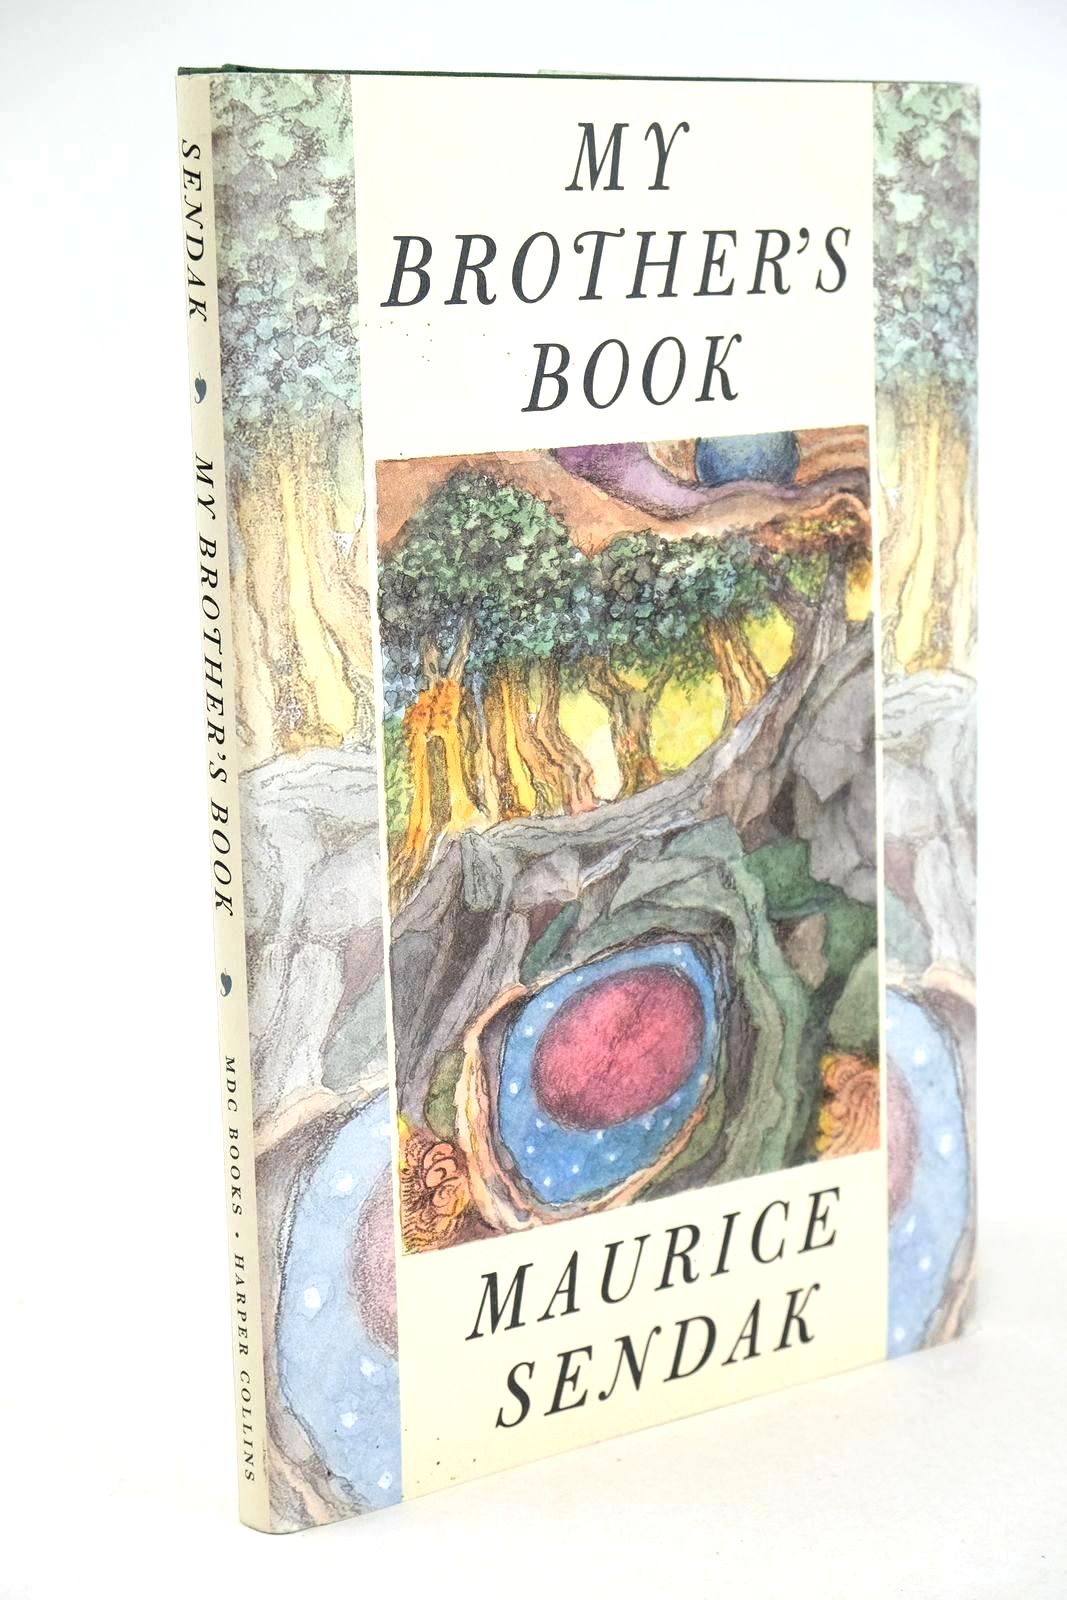 Photo of MY BROTHER'S BOOK written by Sendak, Maurice illustrated by Sendak, Maurice published by Harper Collins (STOCK CODE: 1325814)  for sale by Stella & Rose's Books